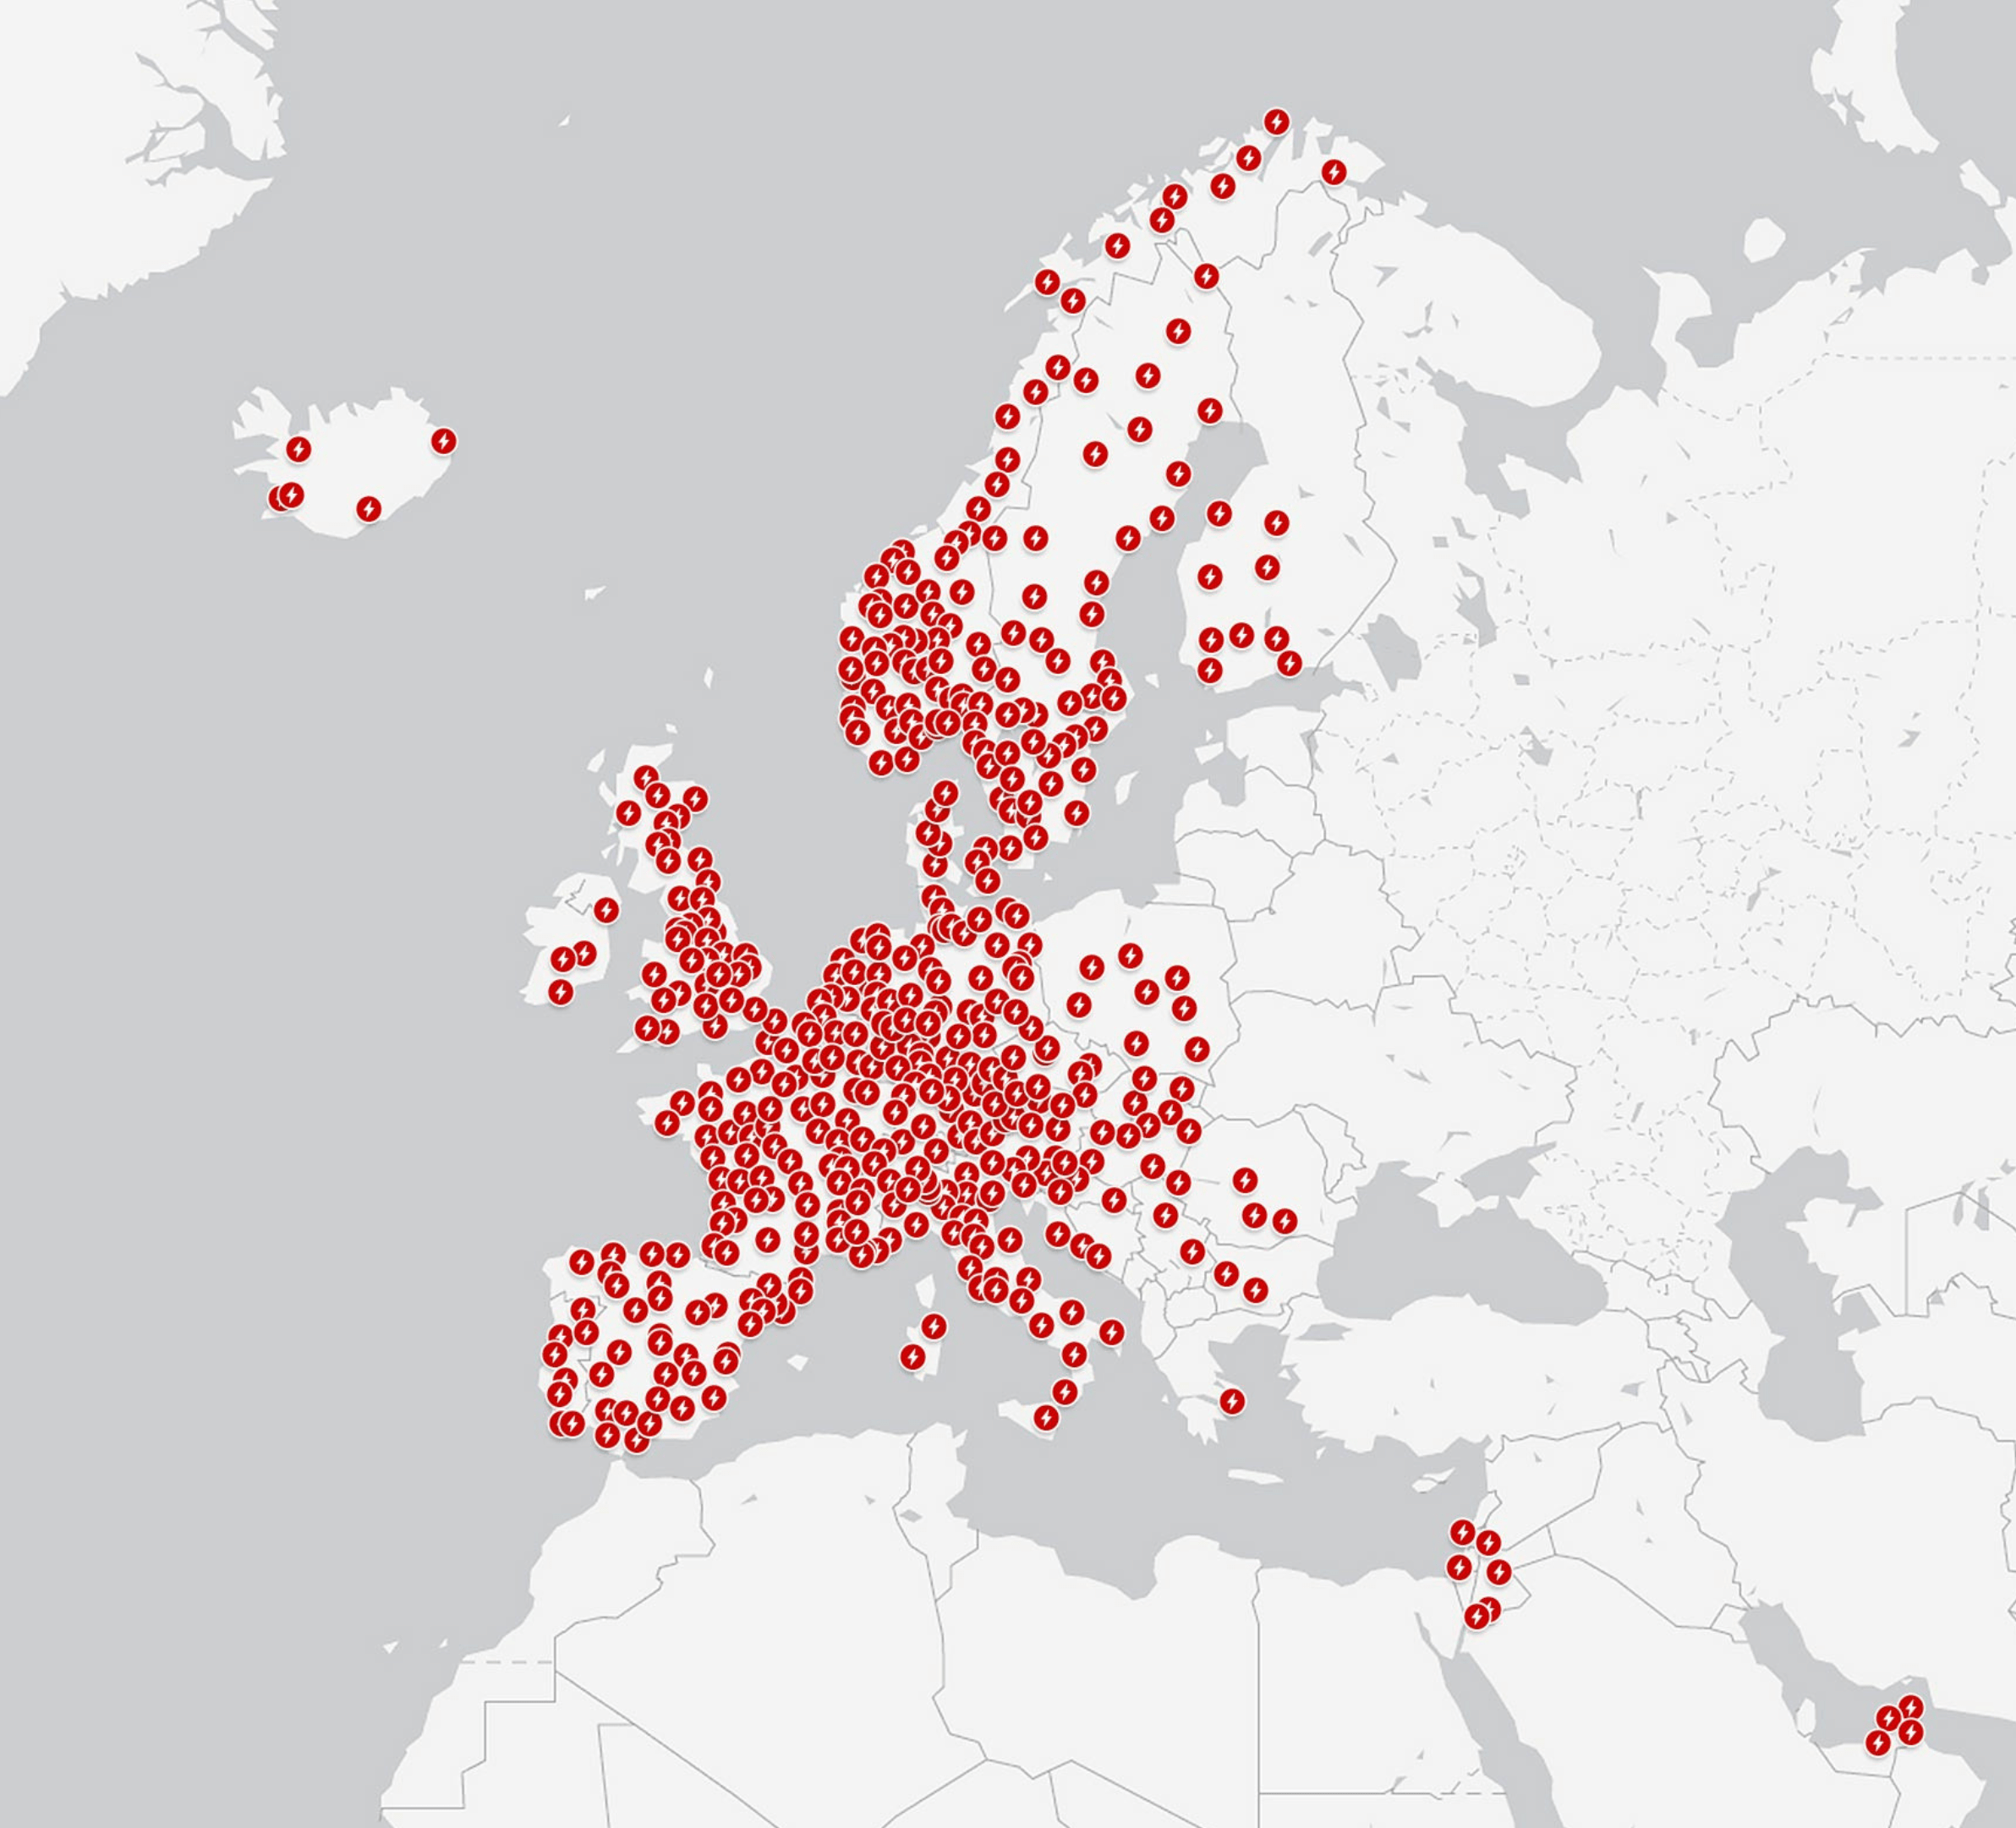 Europe Supercharger Map